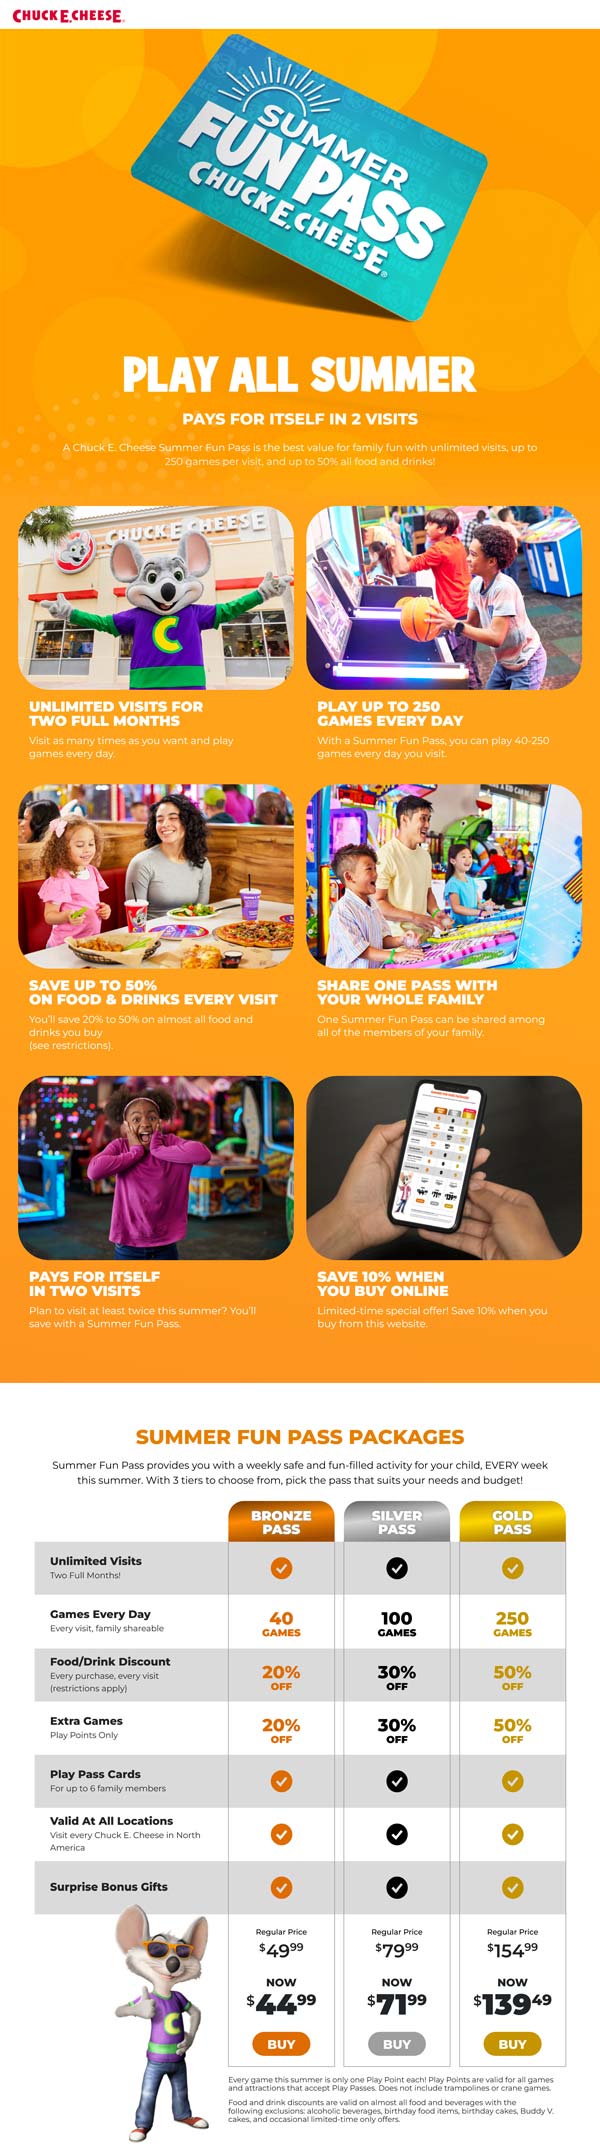 Chuck E. Cheese restaurants Coupon  Various game passes enable game play daily all summer at Chuck E. Cheese pizza #chuckecheese 